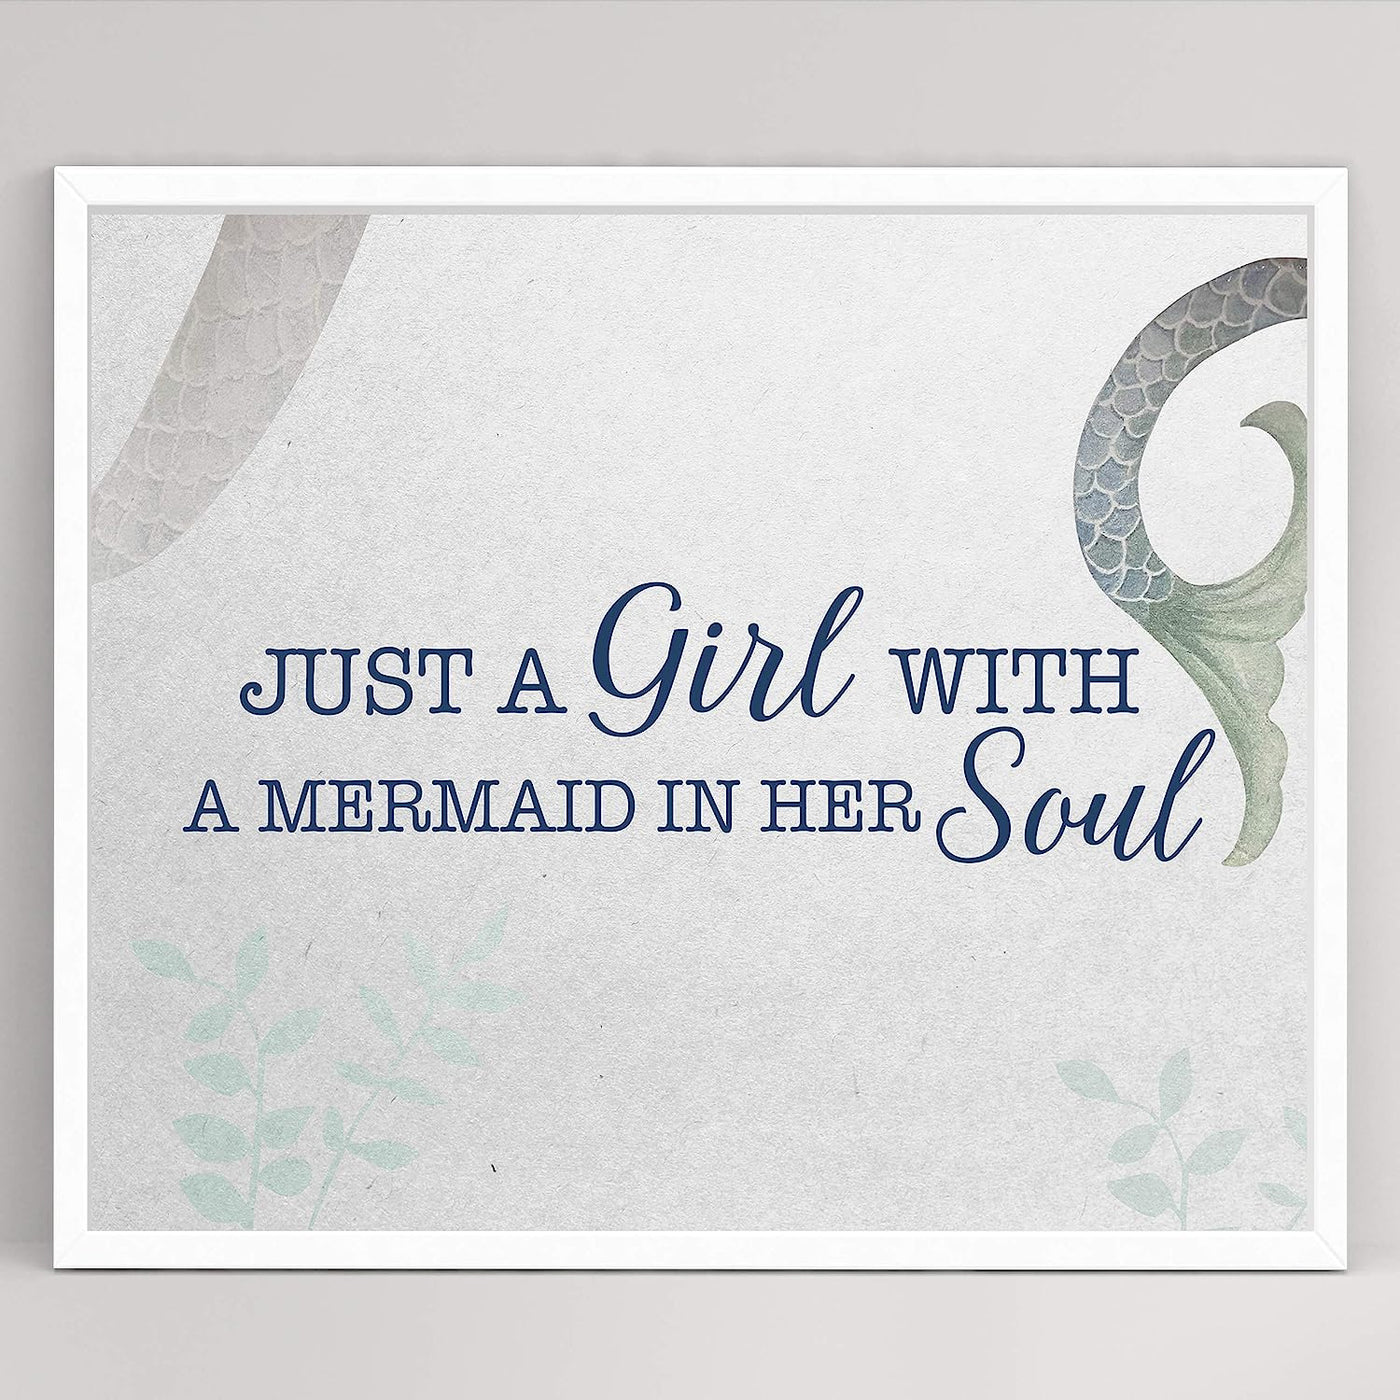 Just A Girl With A Mermaid In Her Soul Fun Beach Themed Sign -10 x 8" Typographic Art Print w/Mermaid Tail Image-Ready to Frame. Home-Girls Bedroom-Ocean Decor. Perfect for the Beach House!